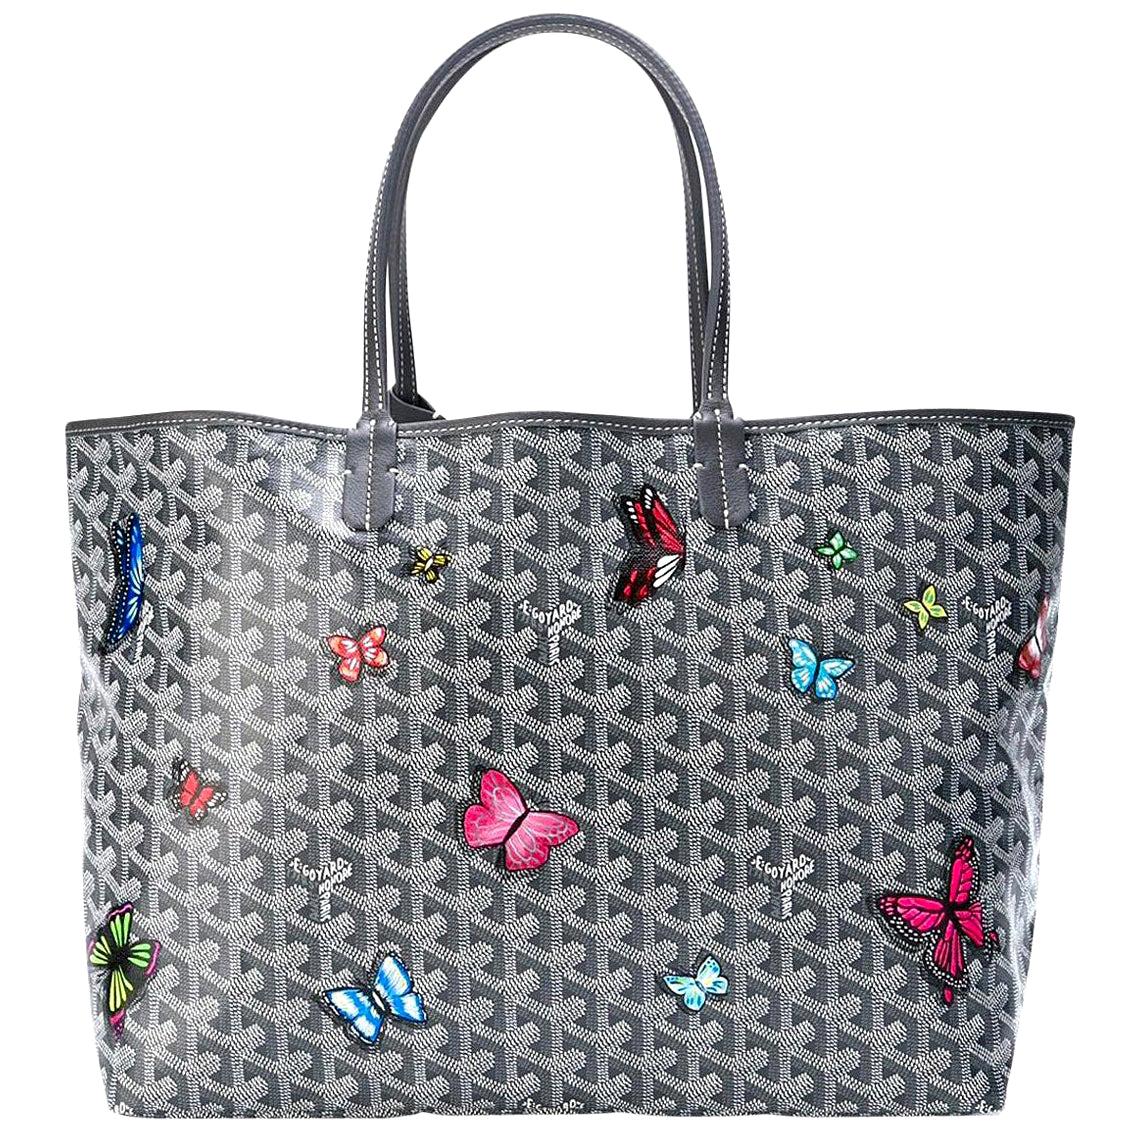 How much is a Goyard St Louis tote?